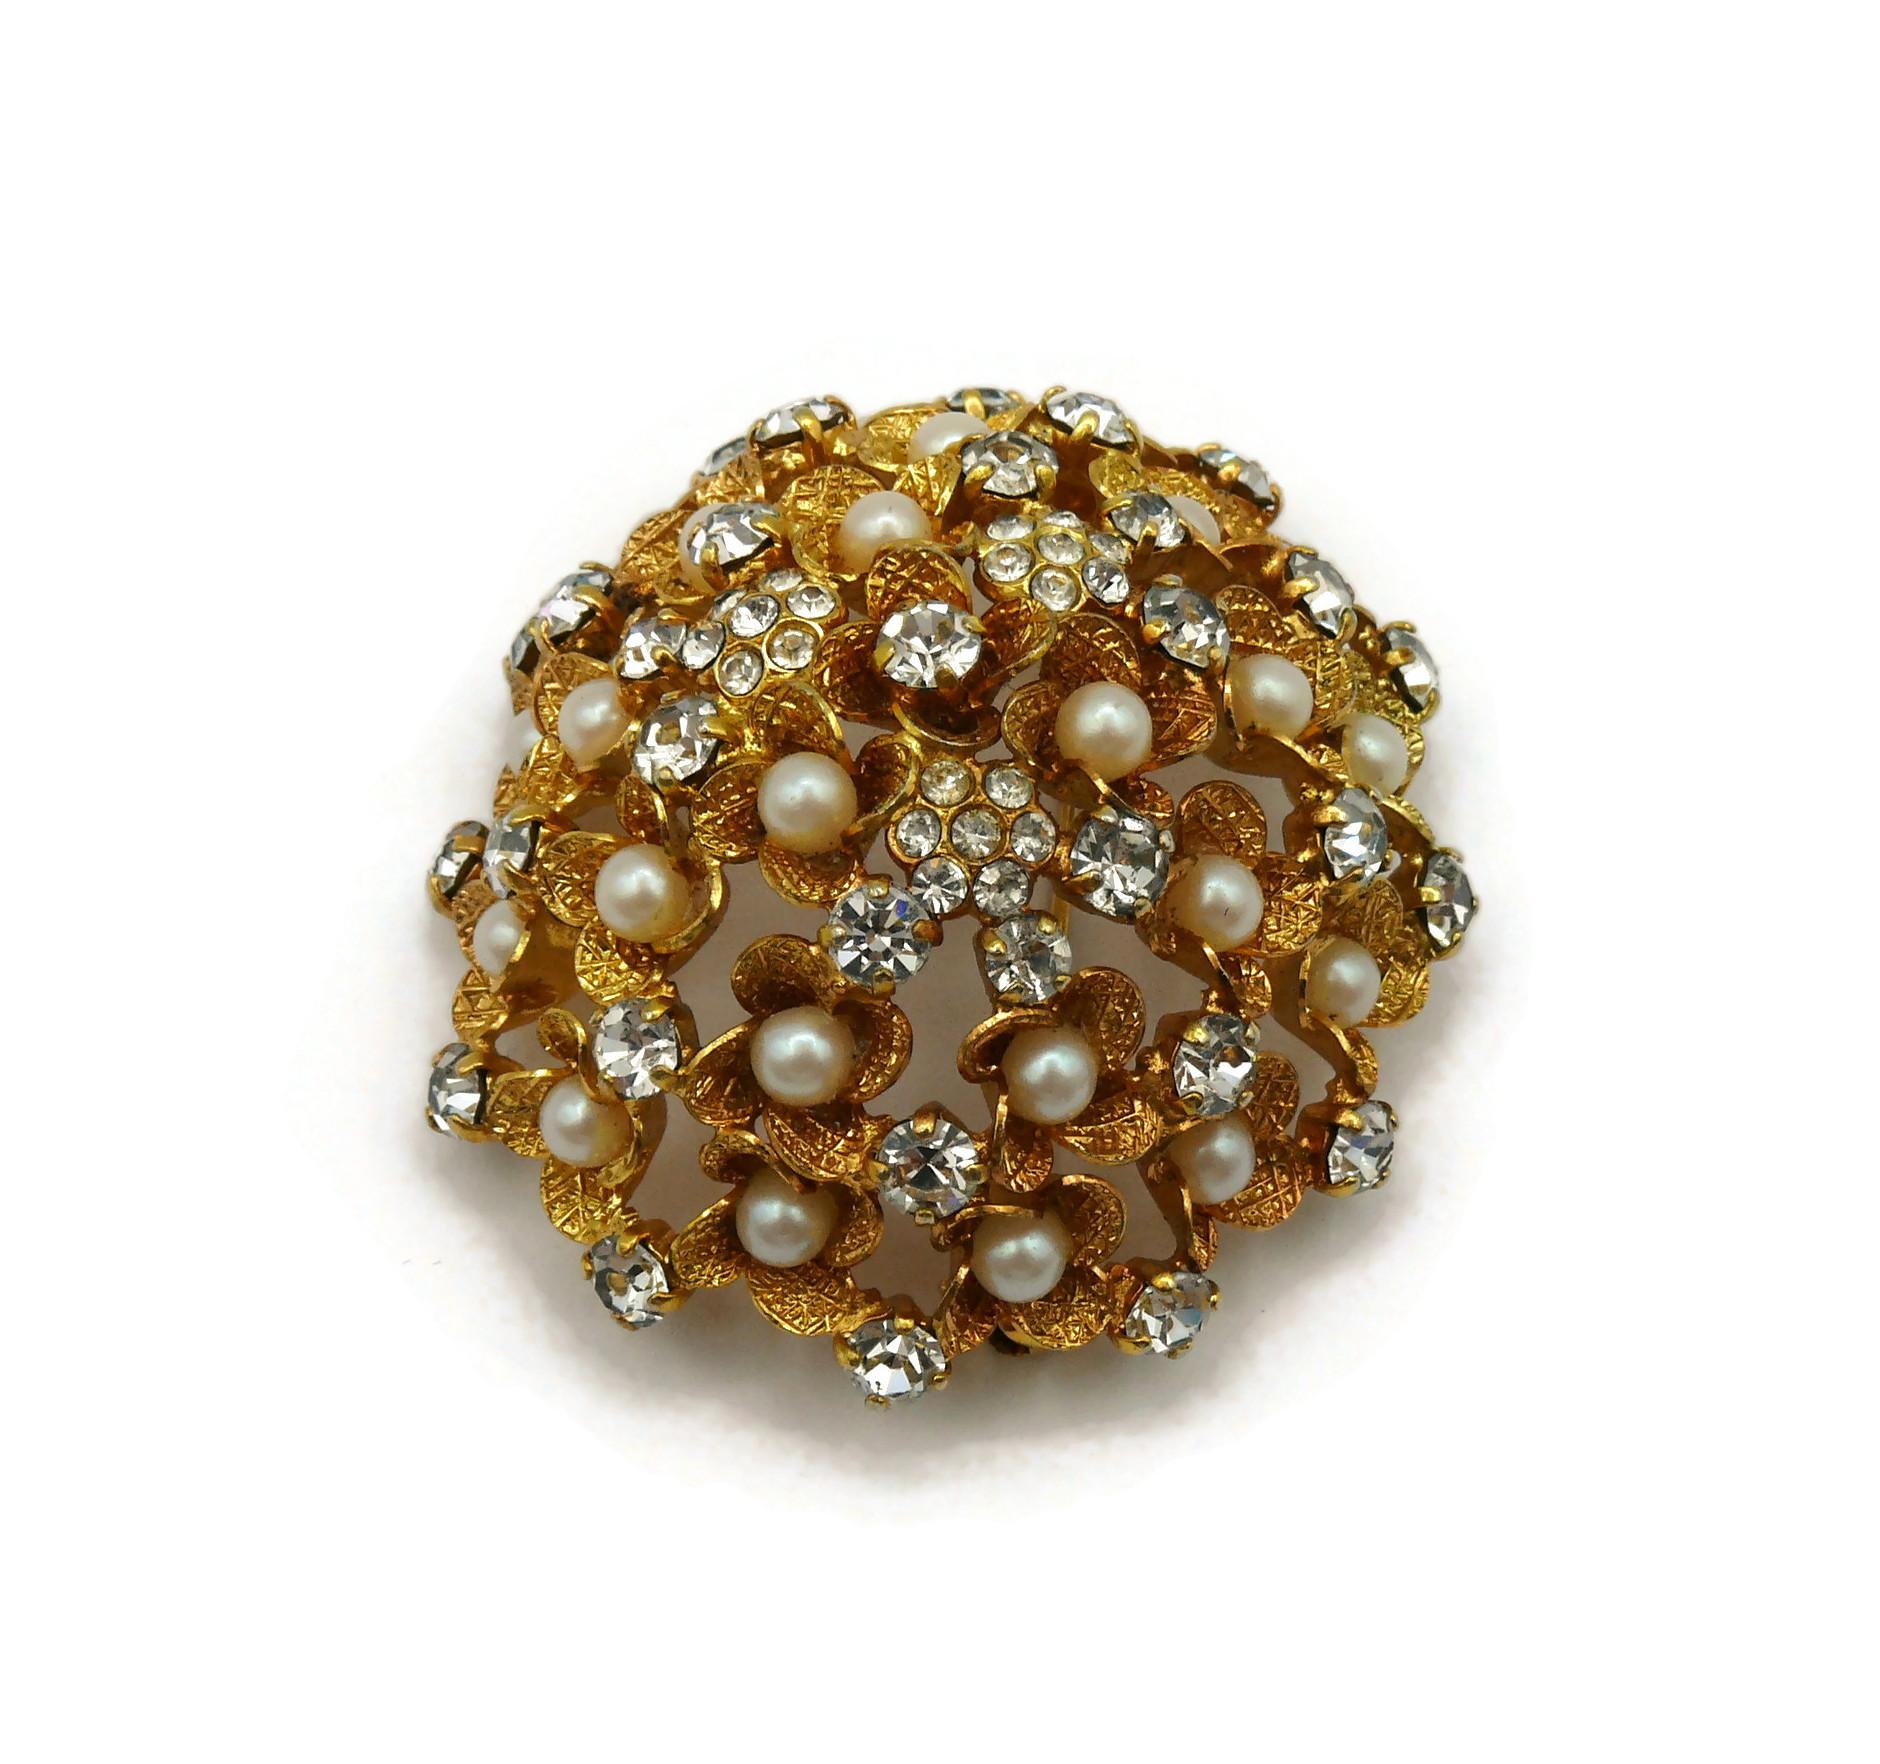 CHRISTIAN DIOR Vintage Jewelled Gold Tone Domed Brooch, 1966 For Sale 2